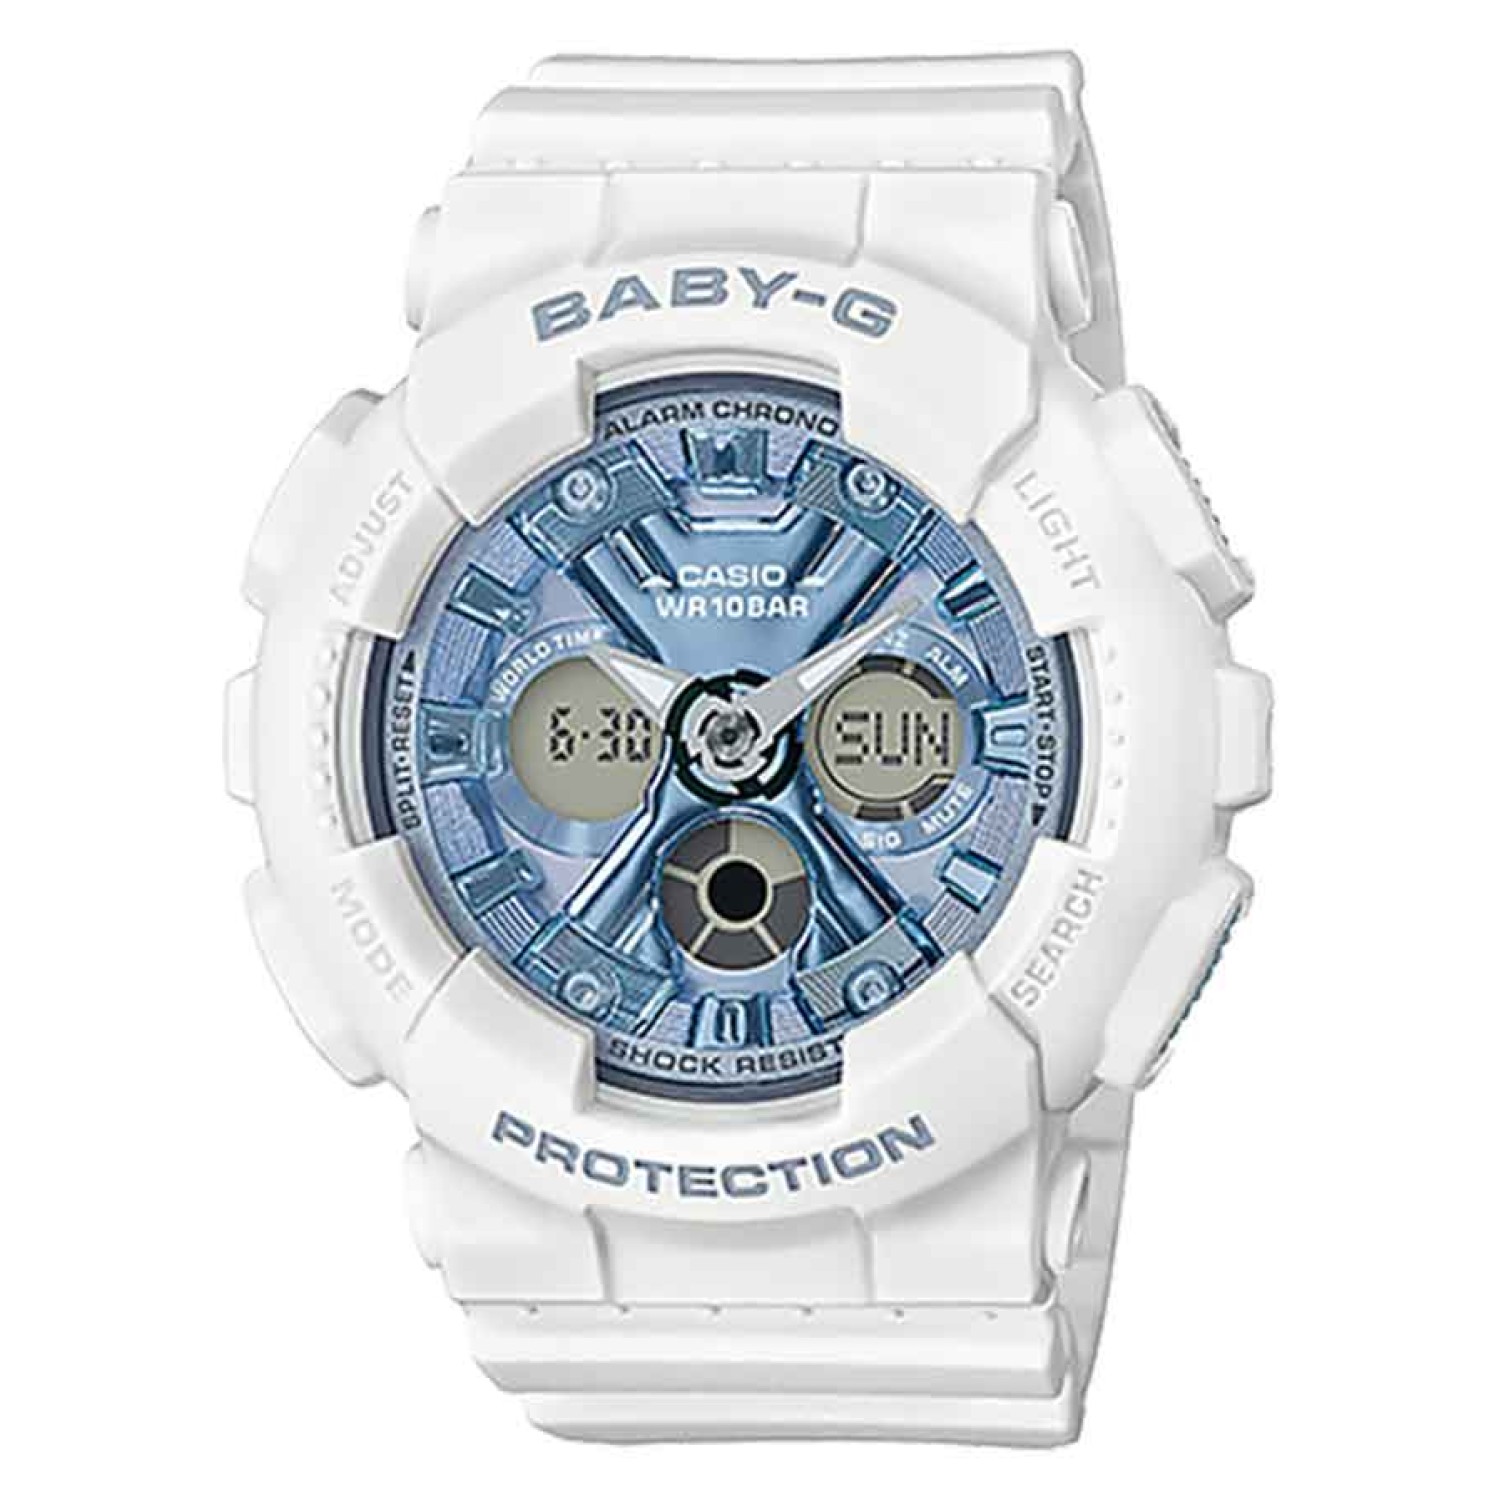 BA130-7A2 Casio BabY-G Special Colours Limited Series. From BABY-G, the casual watch for active women, come new models to accent street fashions. The base model is the BA-130, which is a compact version of the popular G-SHOCK design. The colours of the wh